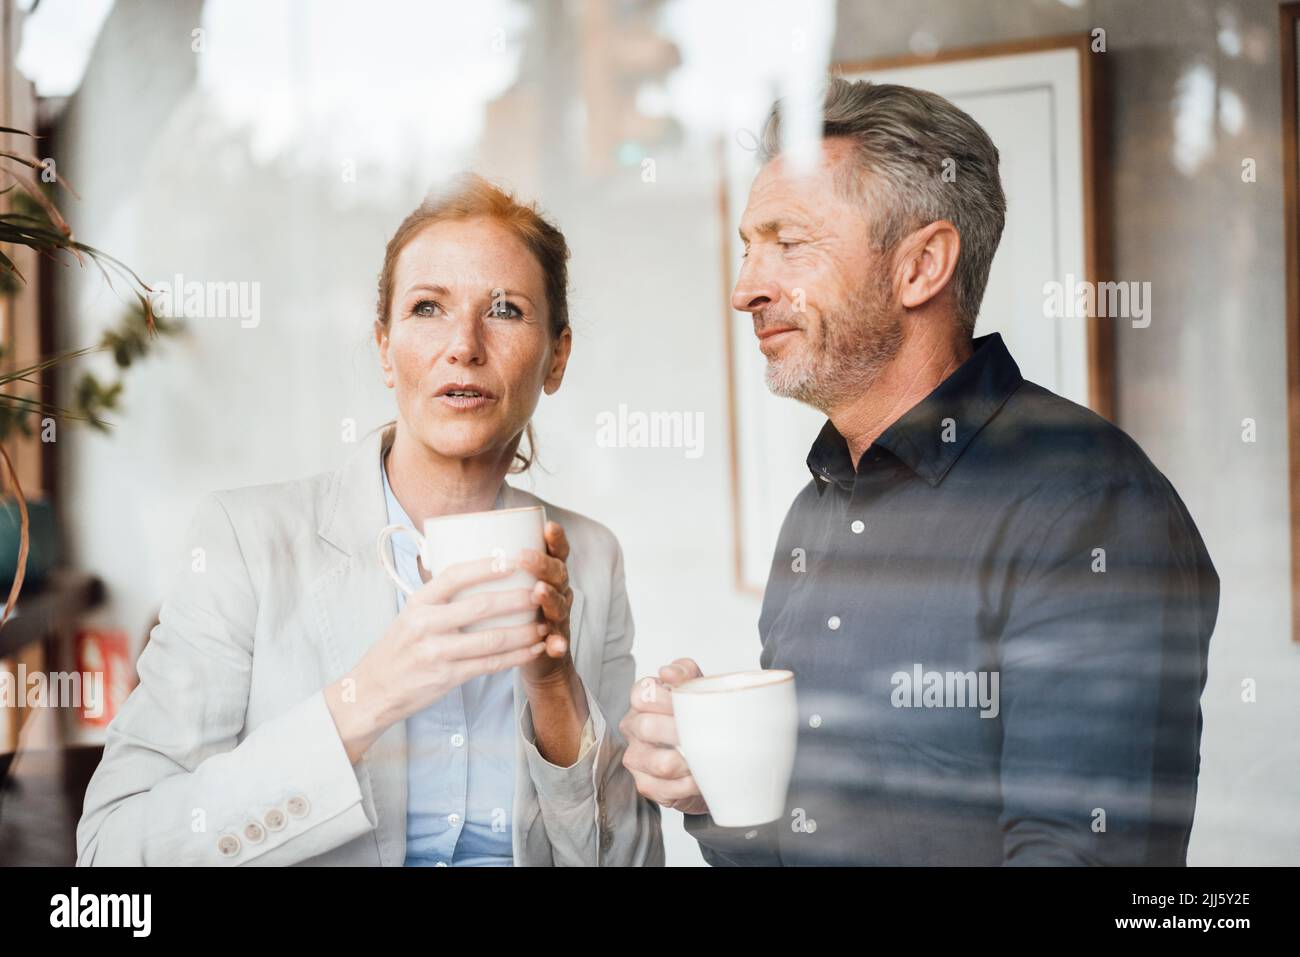 Businesswoman with businessman holding coffee cup in cafe seen through glass Stock Photo